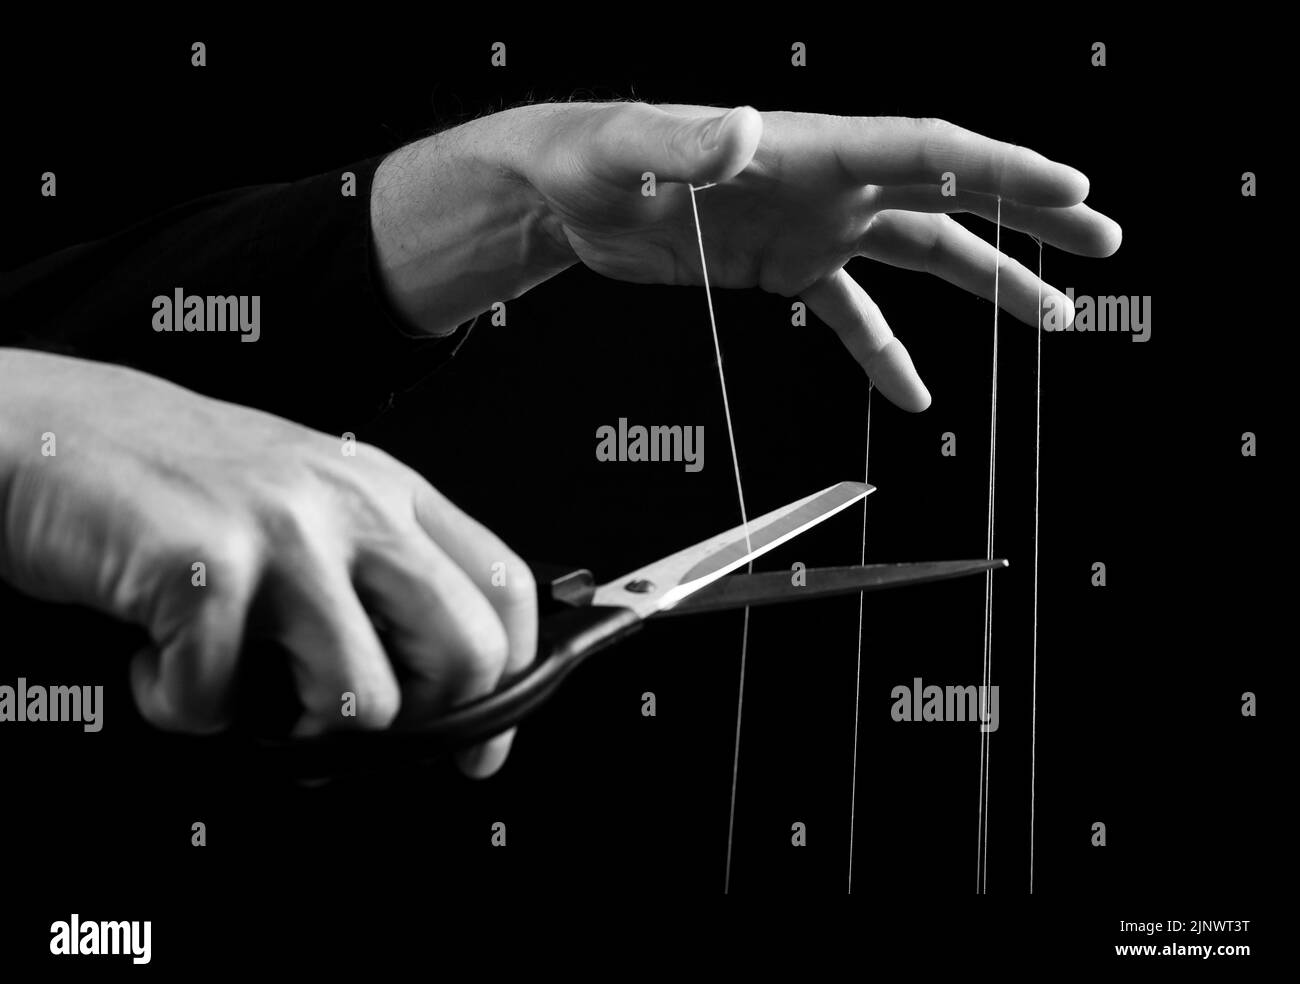 Cutting string of manipulator master hand. Get freedom from influence, dictatorship. Stock Photo